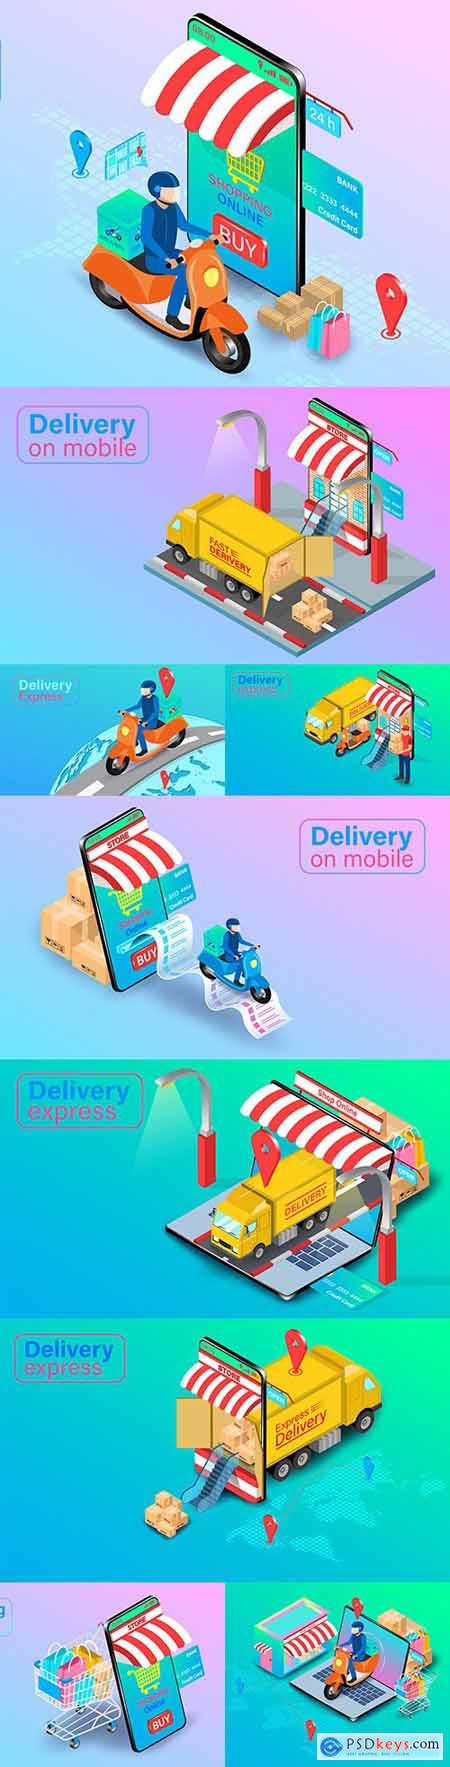 Online ordering and express food delivery isometric flat design